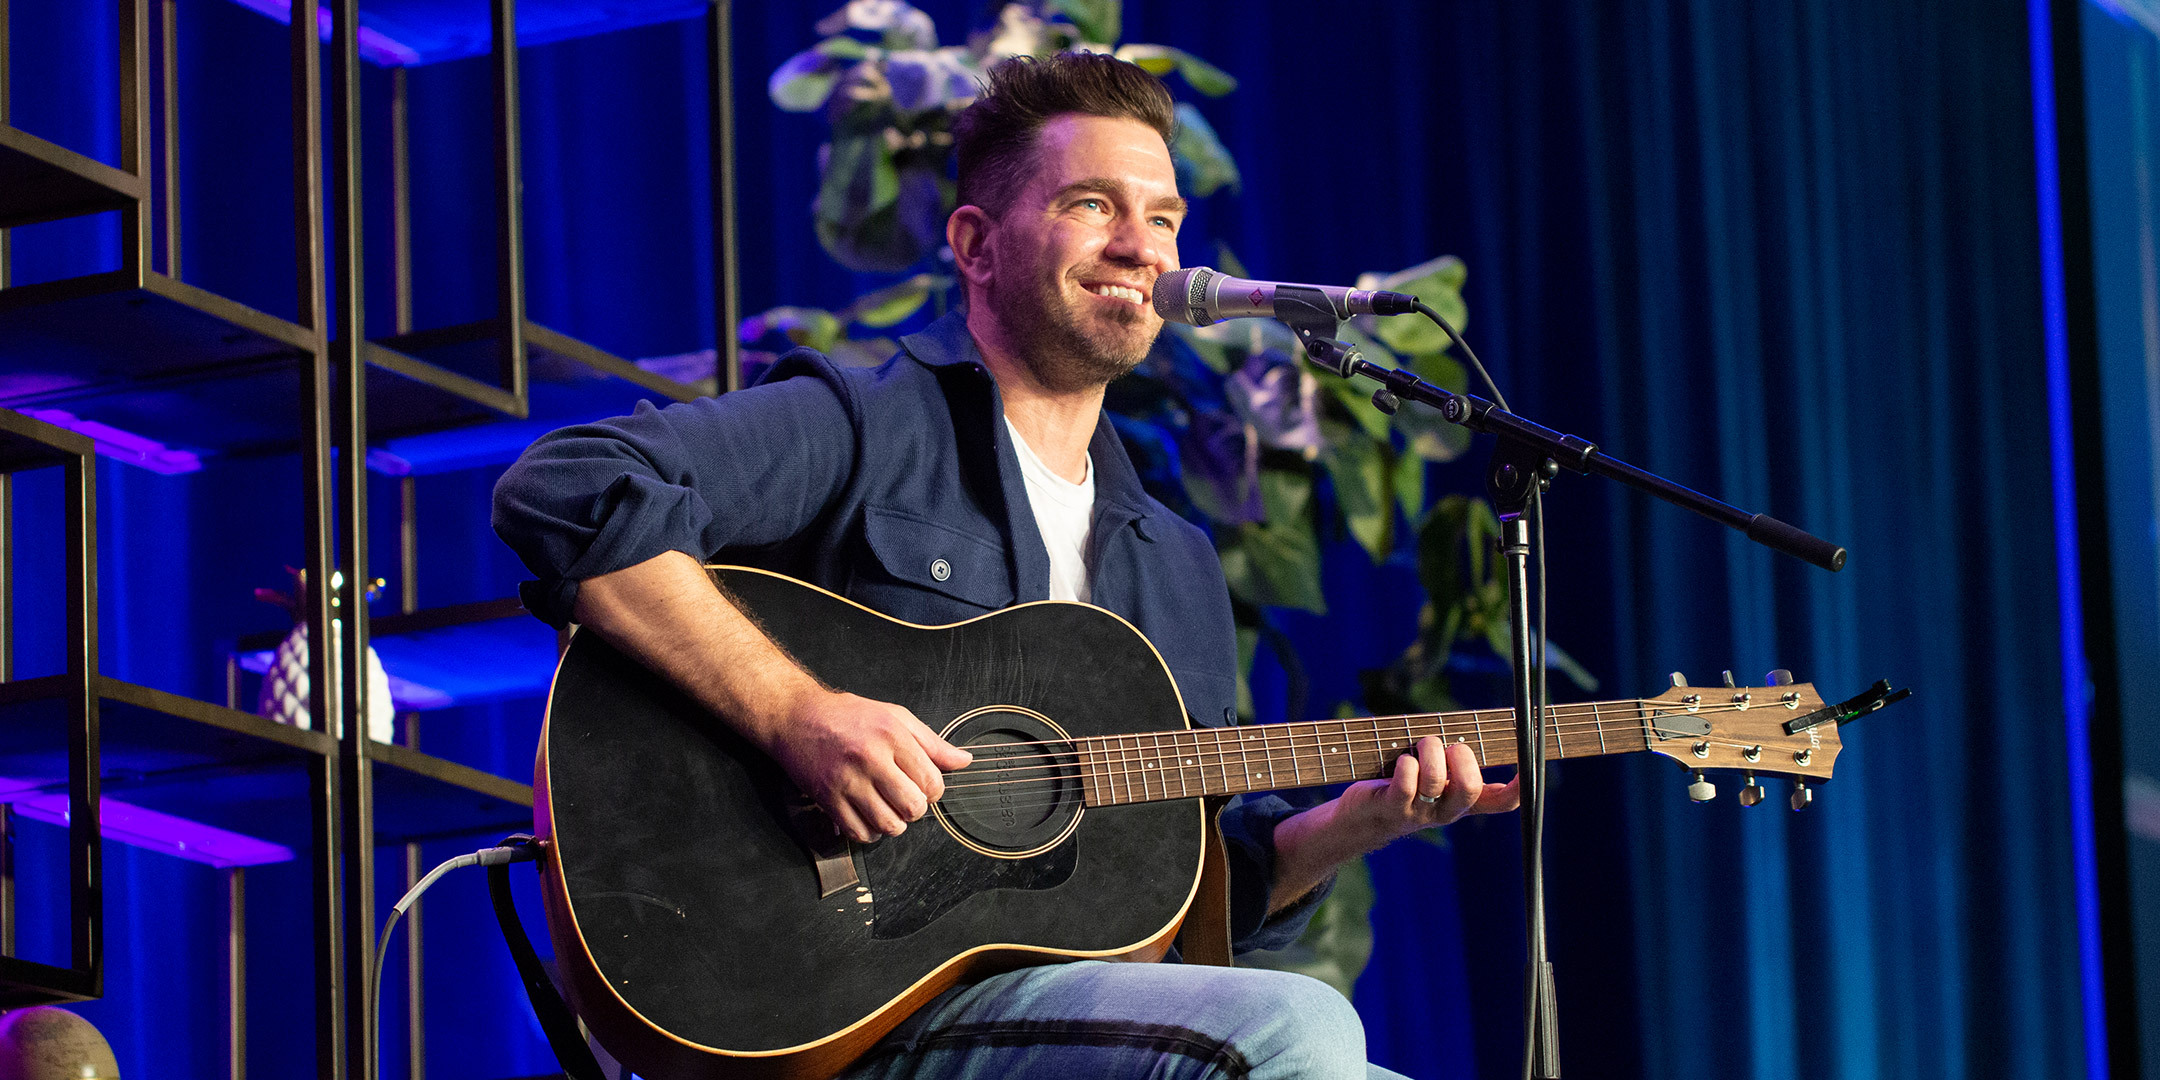 Mental Health America Conference 2022 speaker Andy Grammar plays guitar at microphone